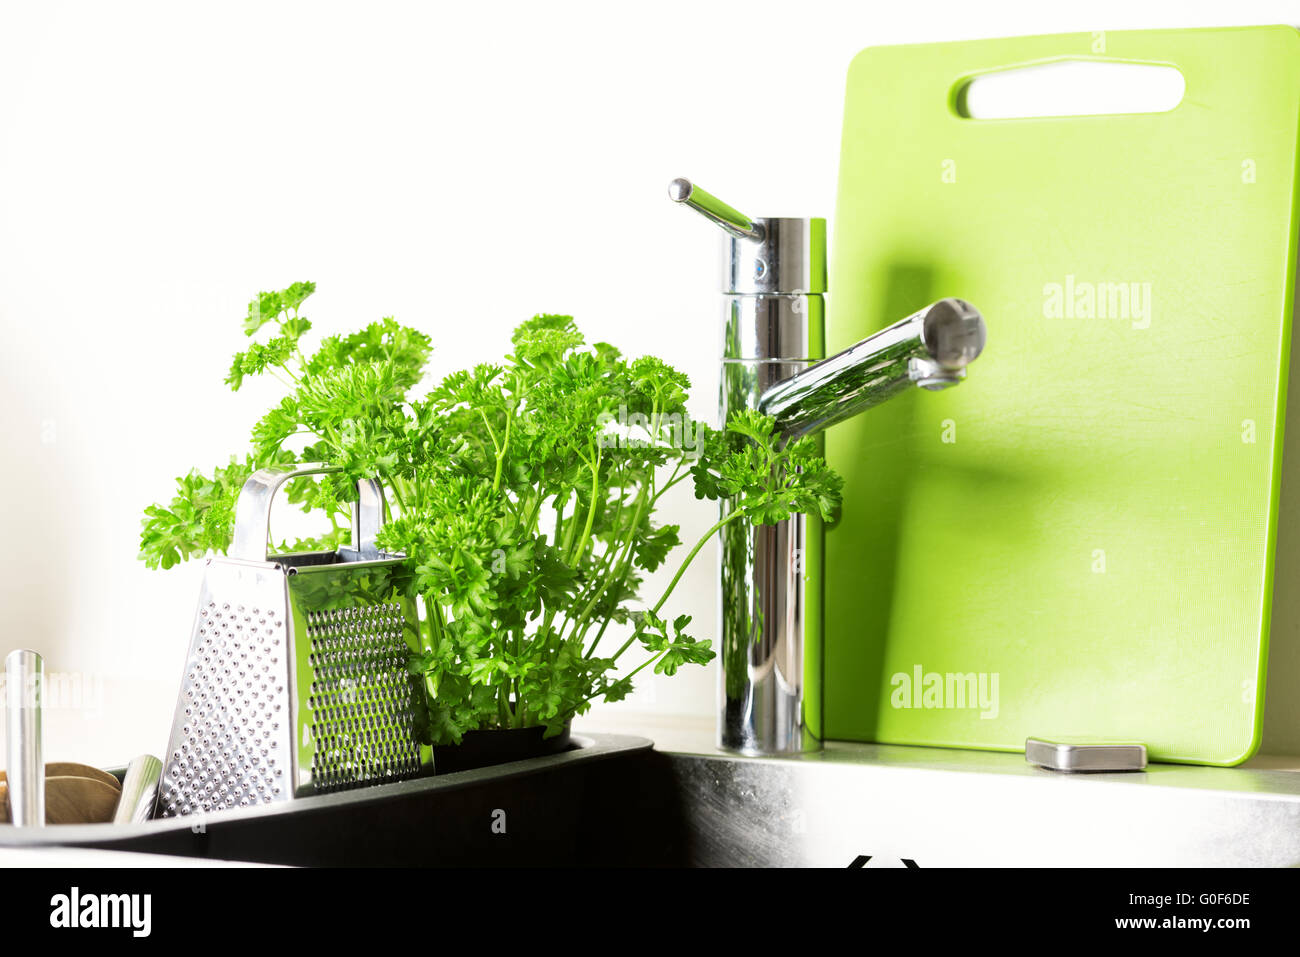 At kitchen: faucet, grater and fresh parsley Stock Photo